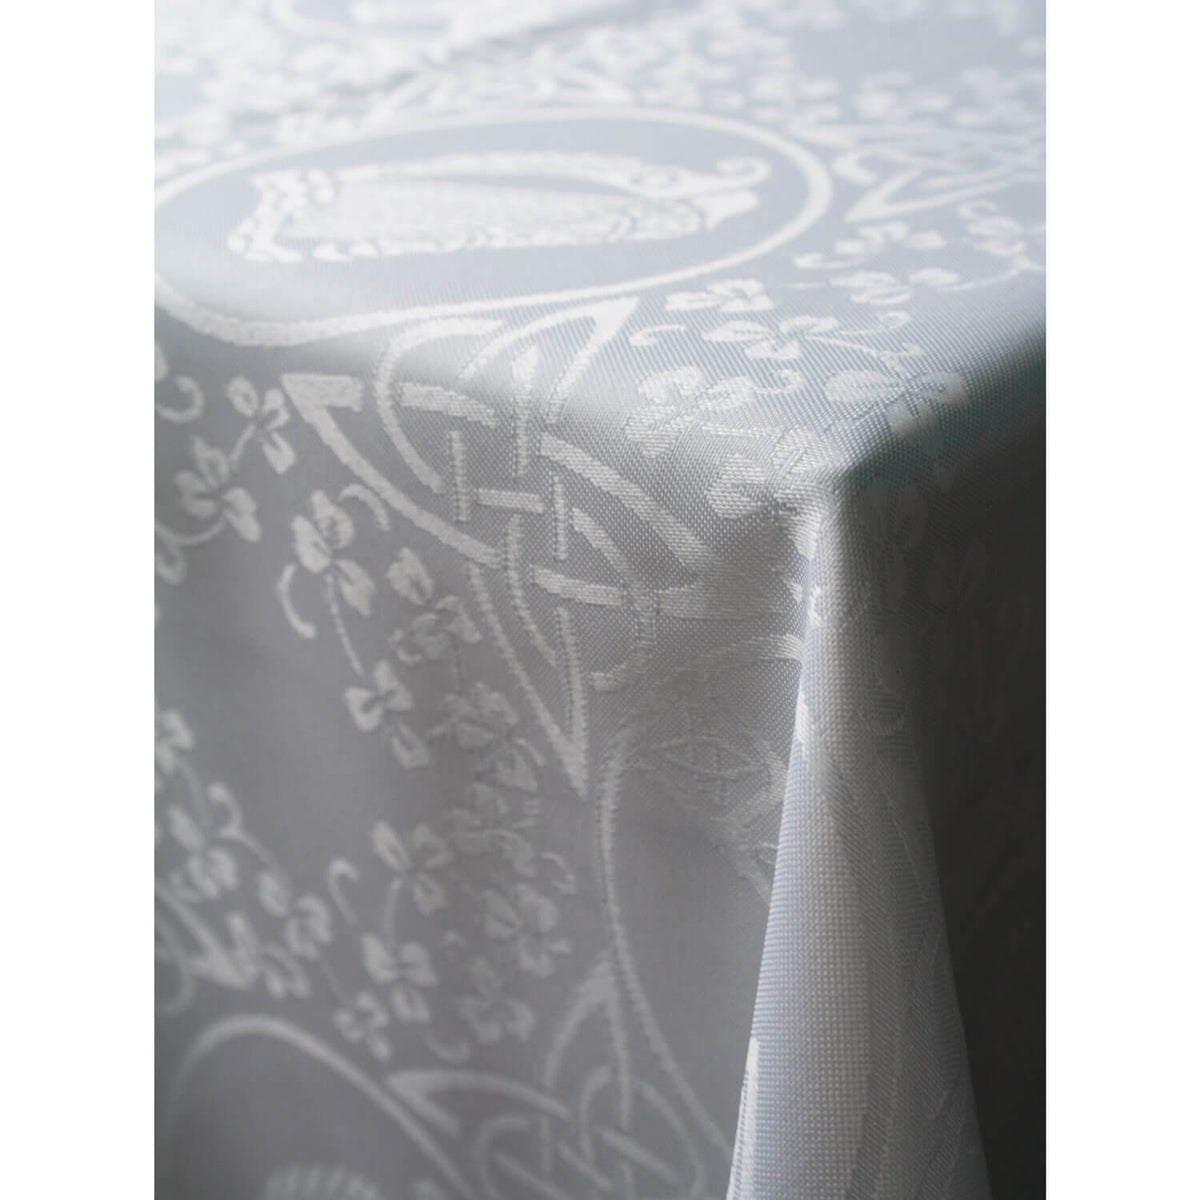 Easy care Damask Tablecloth - White - 54x70inches